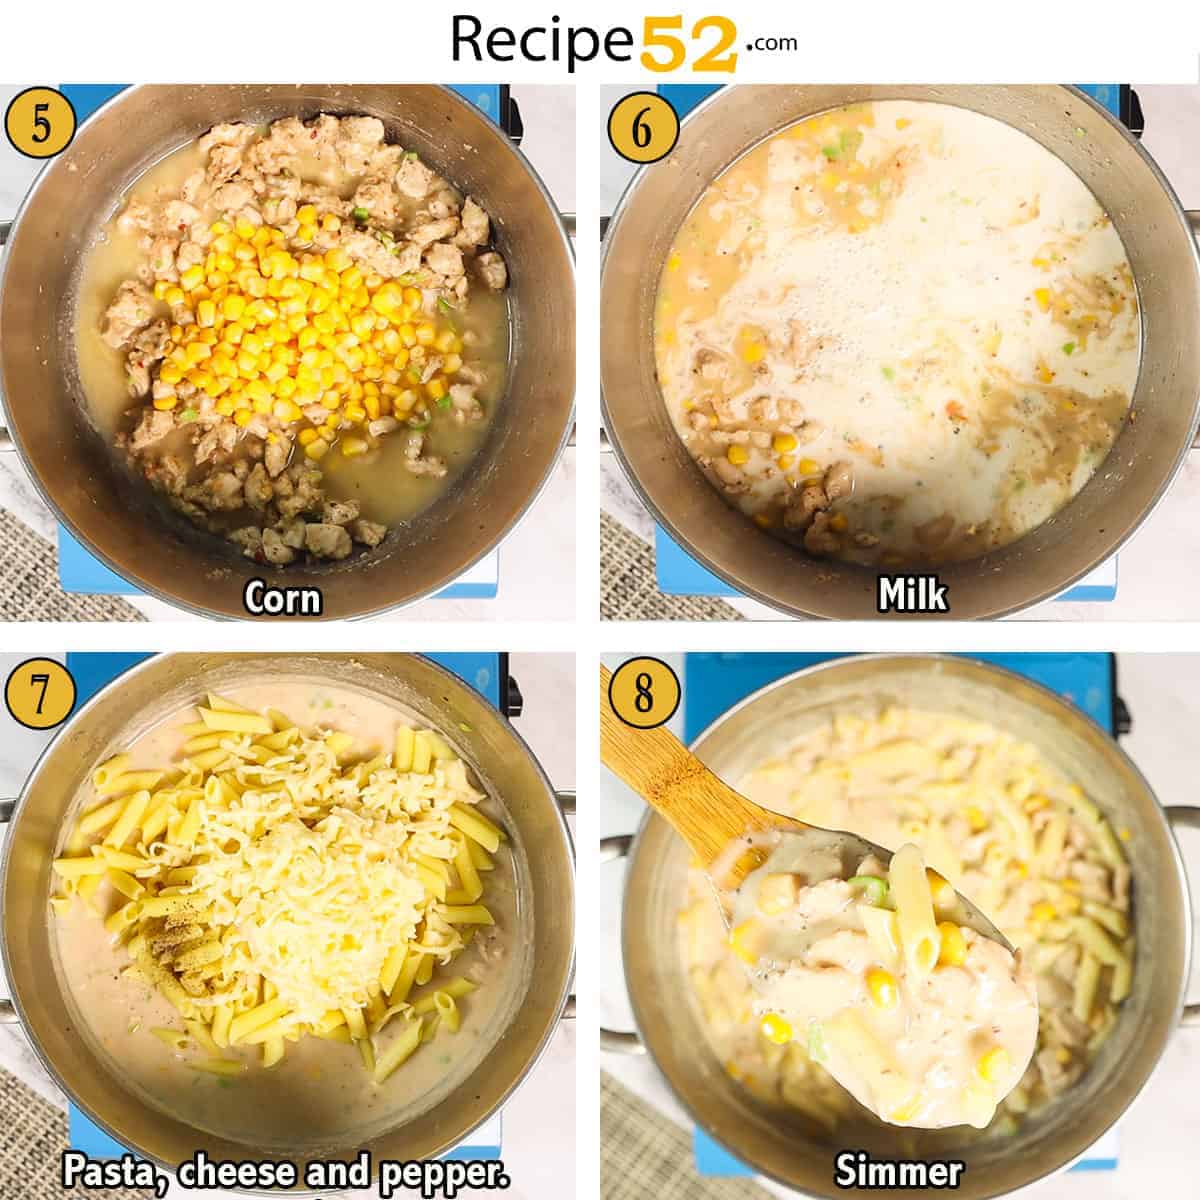 Cooking steps of chicken pasta, from 5 to 8.
